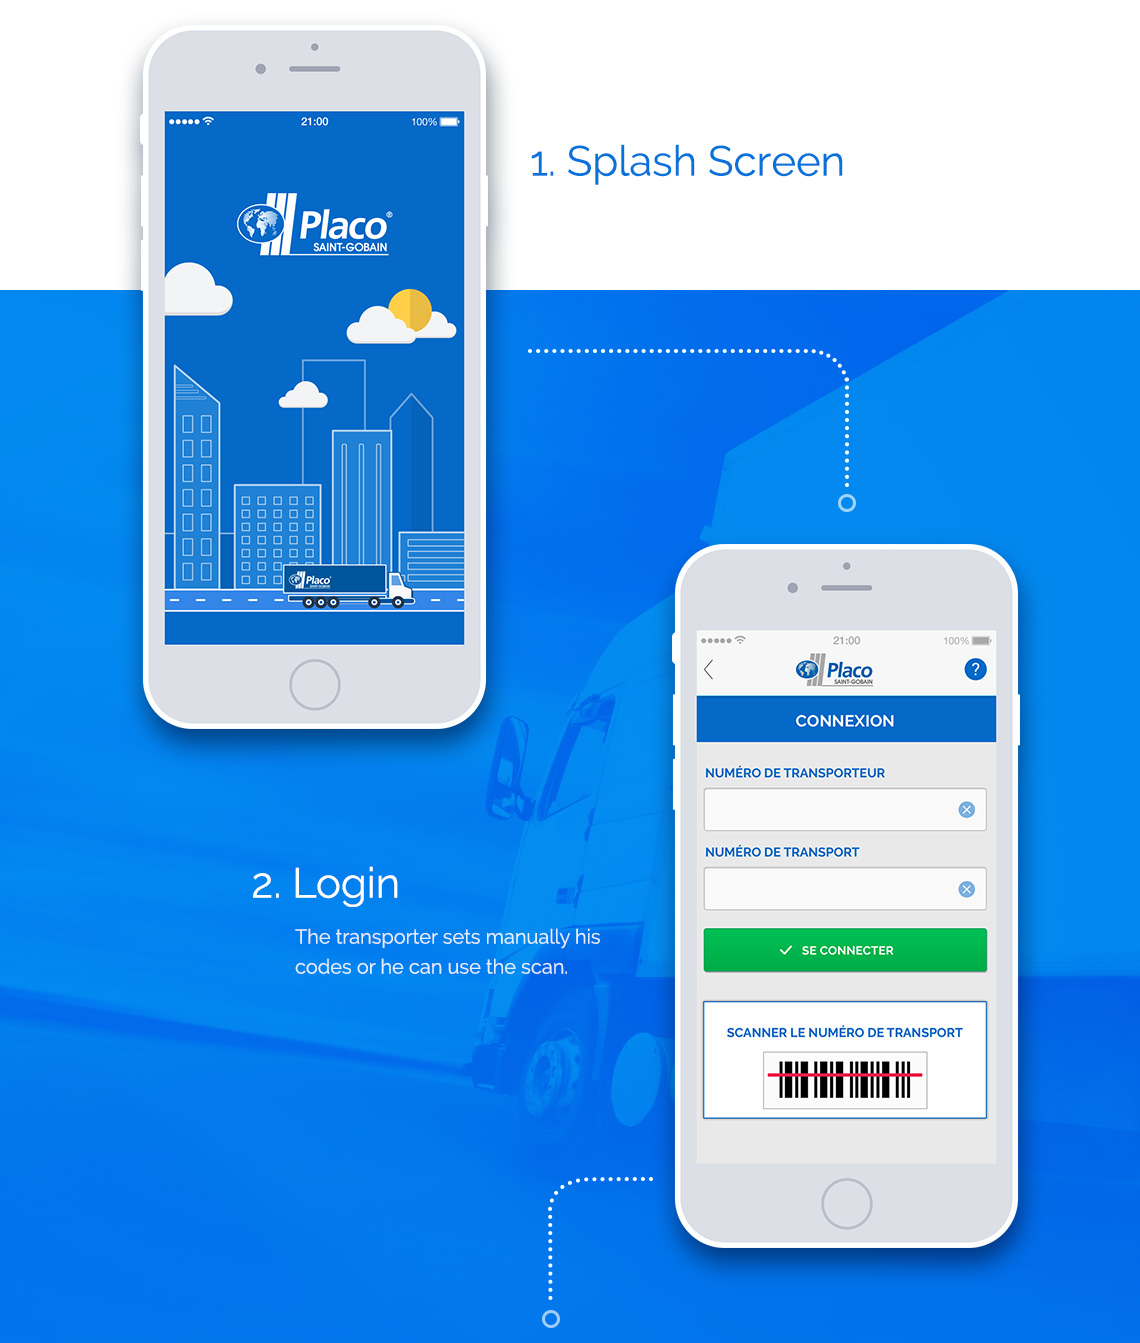 Splash screen and login page: Transporter sets manually his codes  or he can use the scan function.